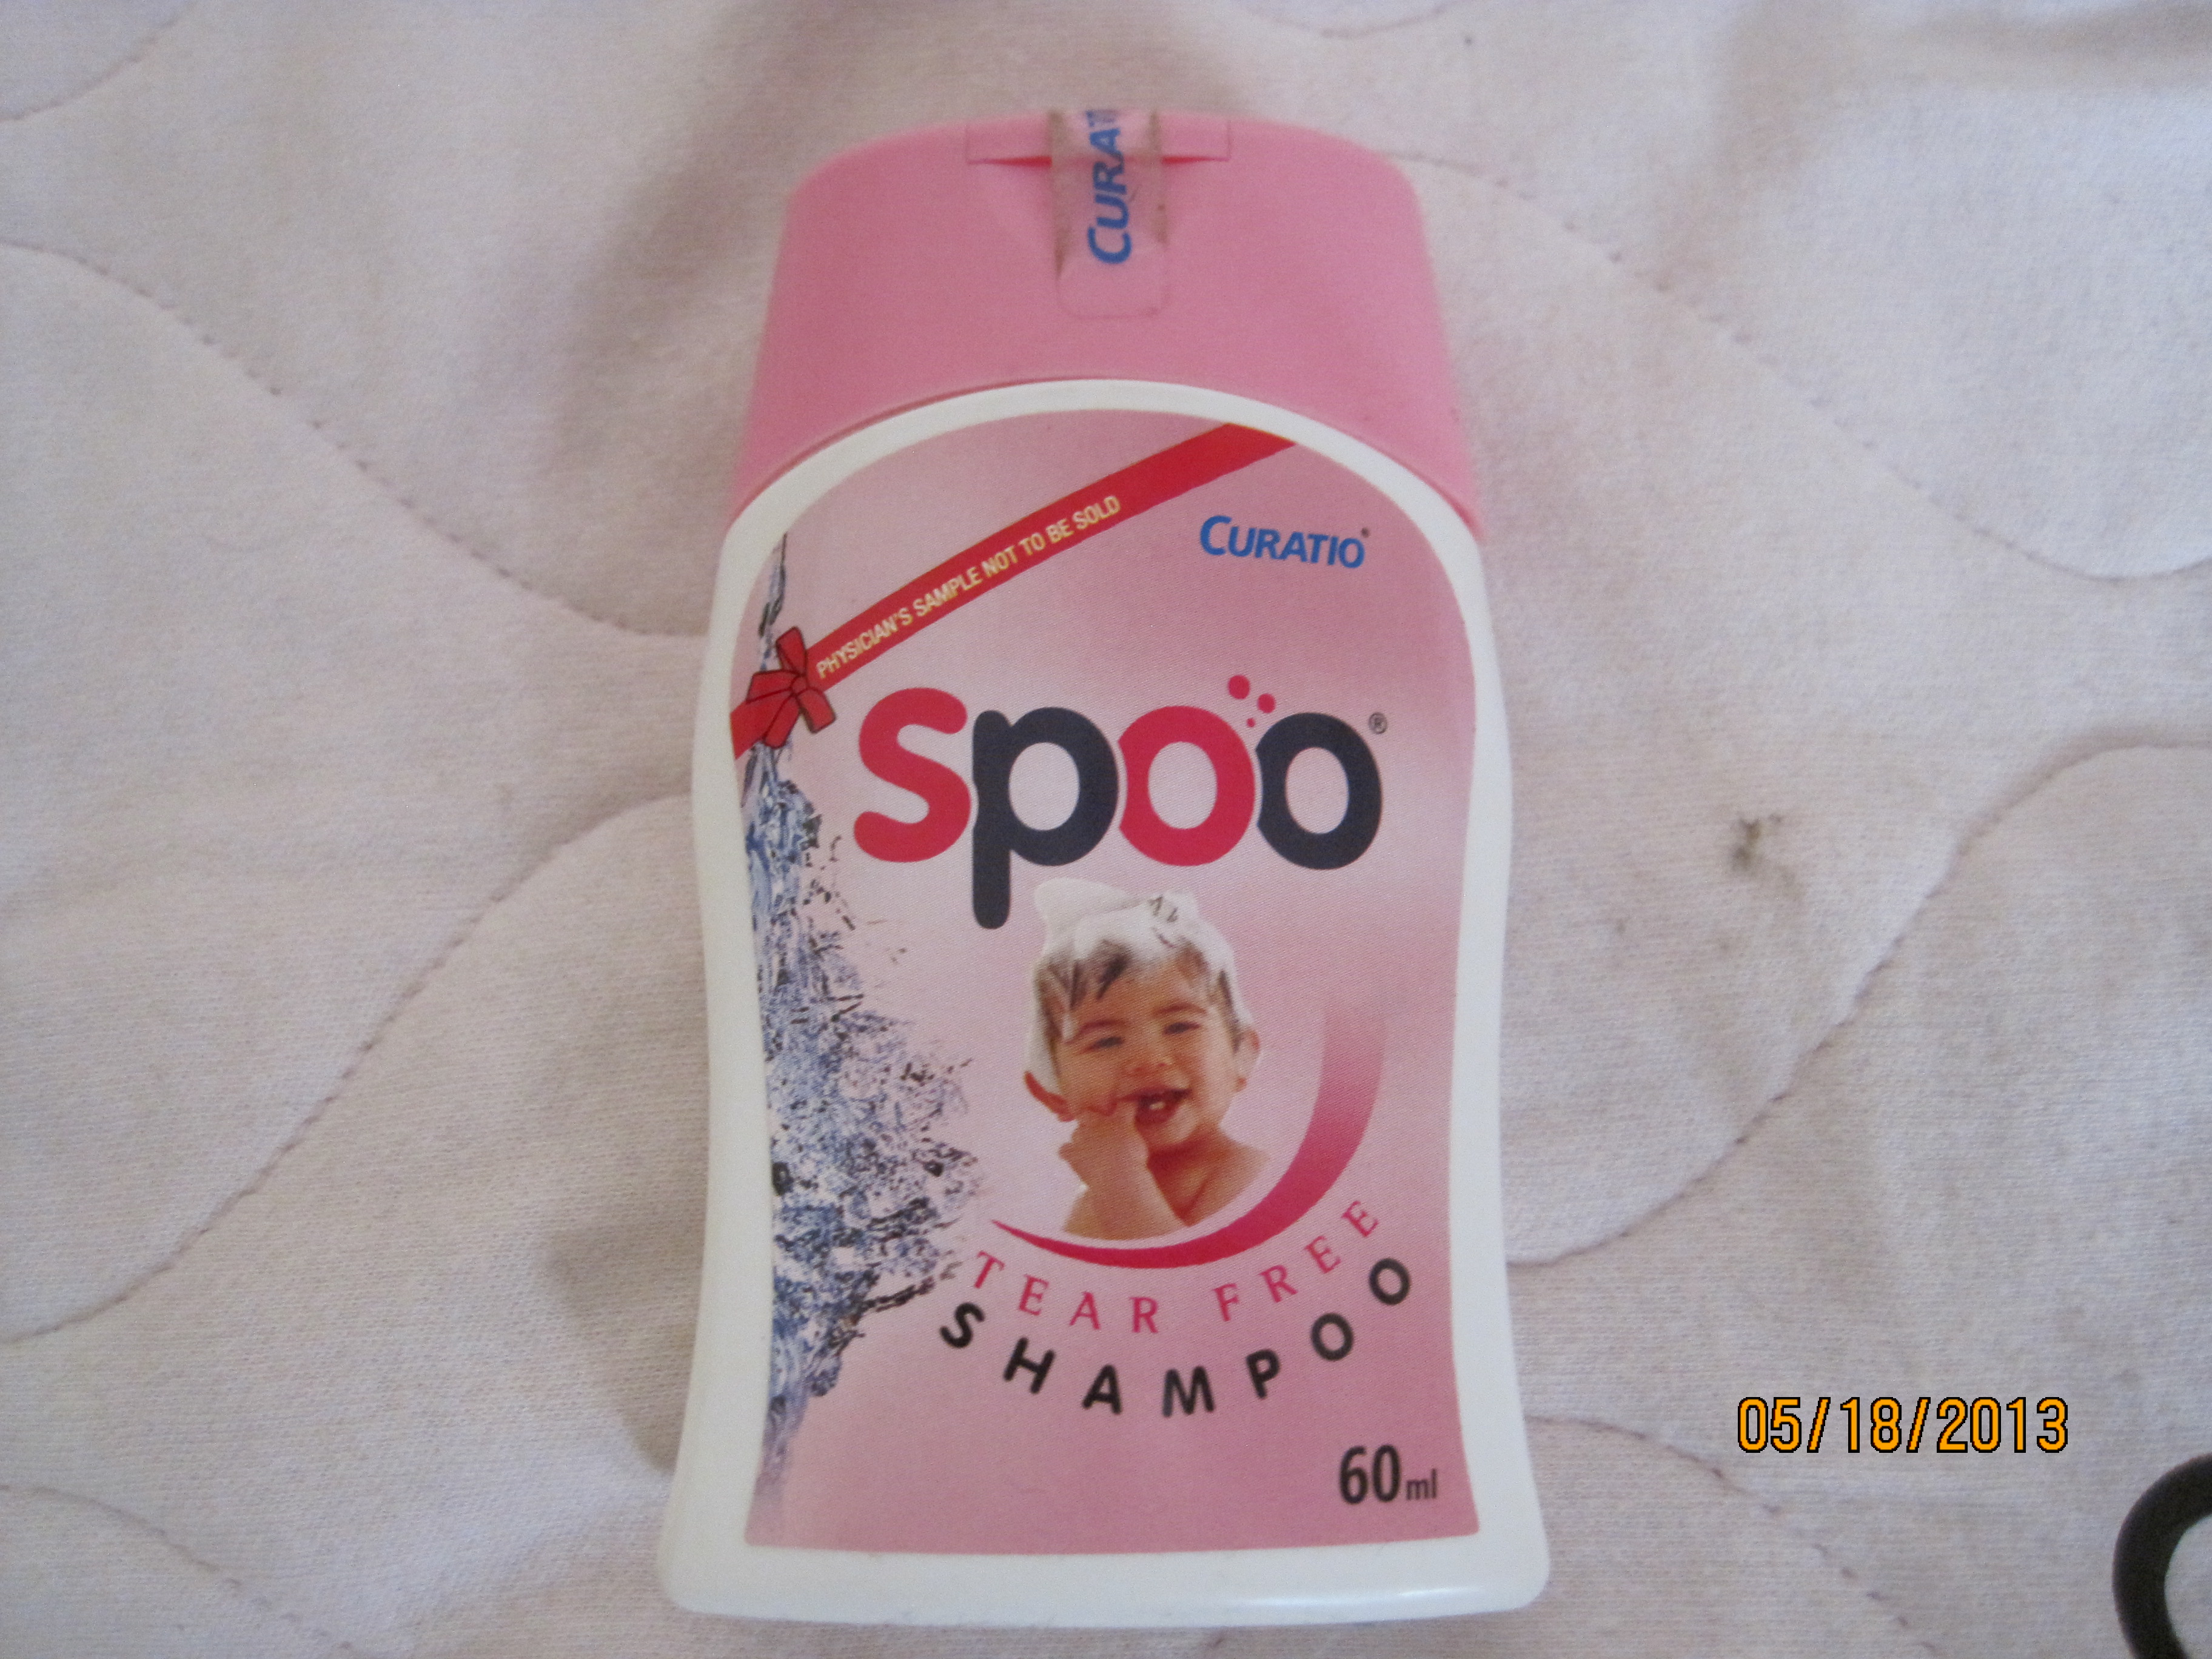 Review of spoo shampoo | Mommyswall